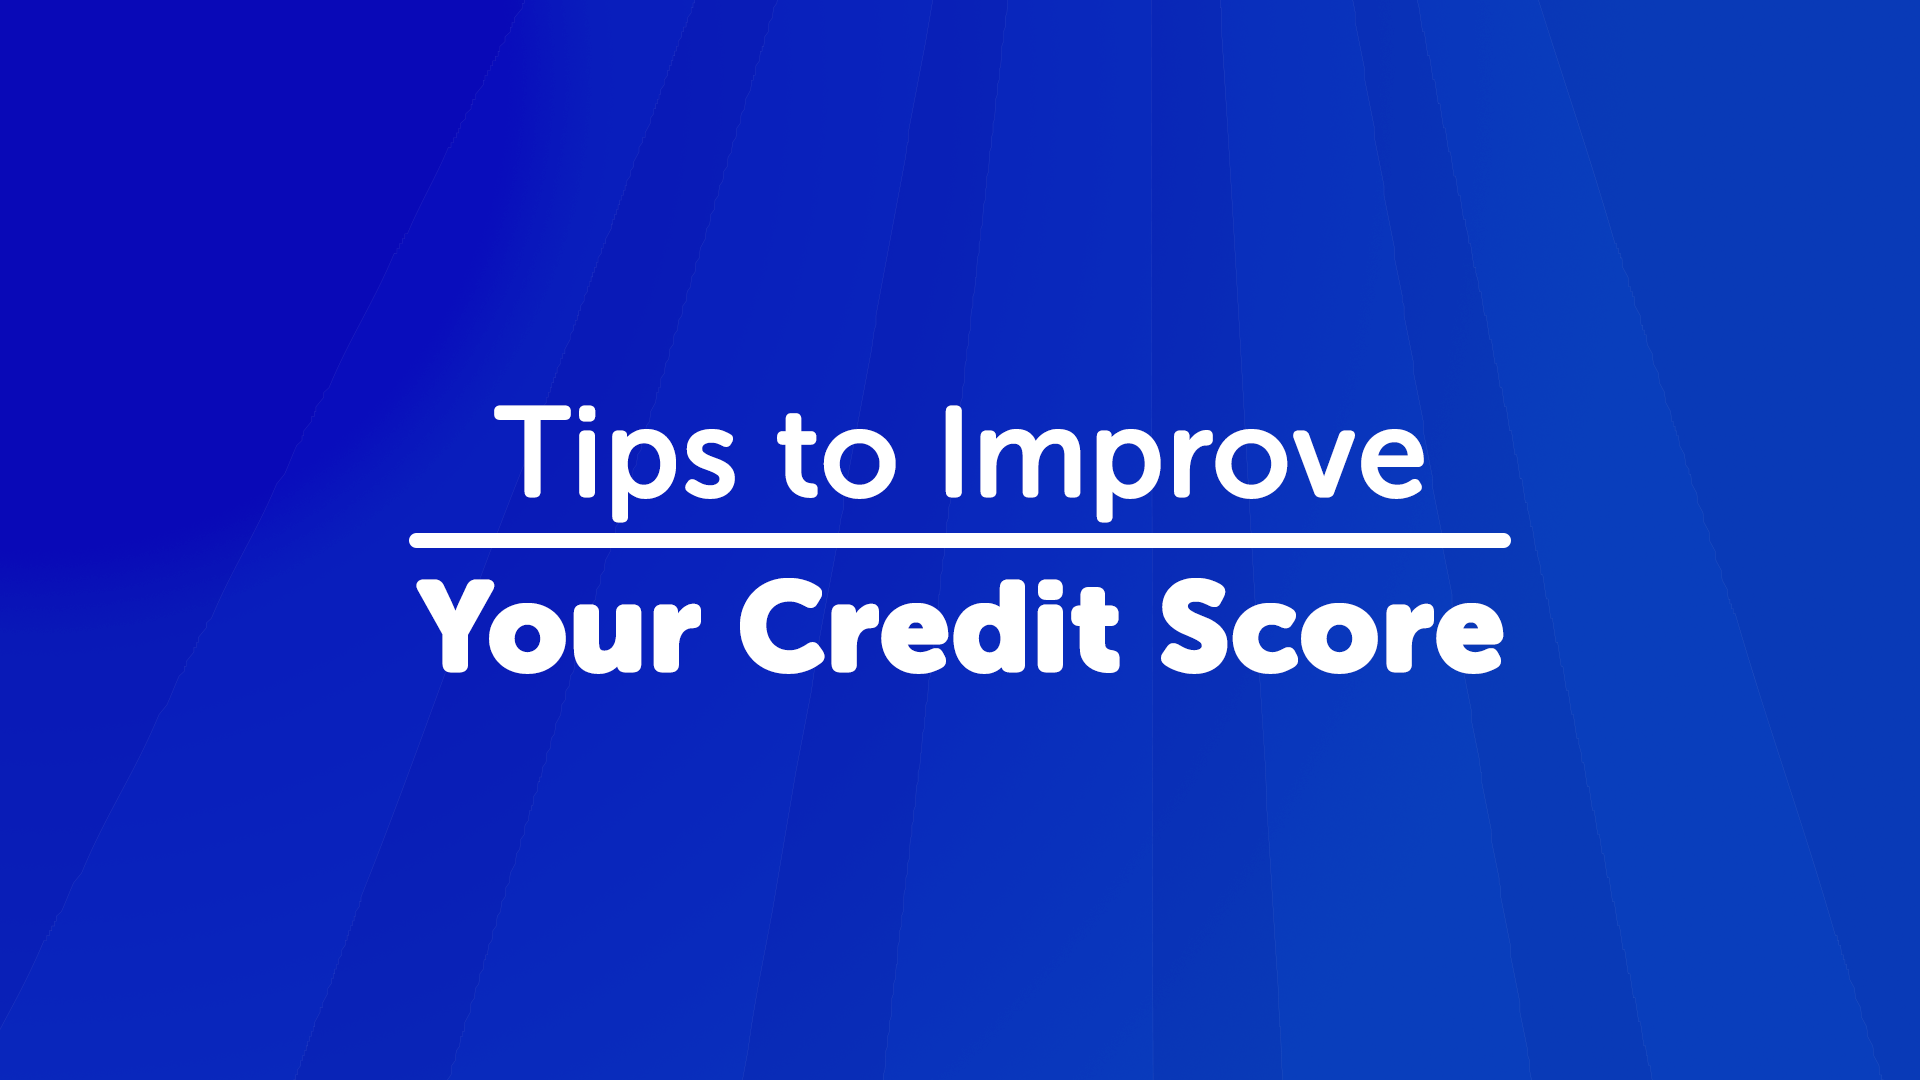 tips to improve your credit score in Middlesbrough | Middlesbroughmoneyman